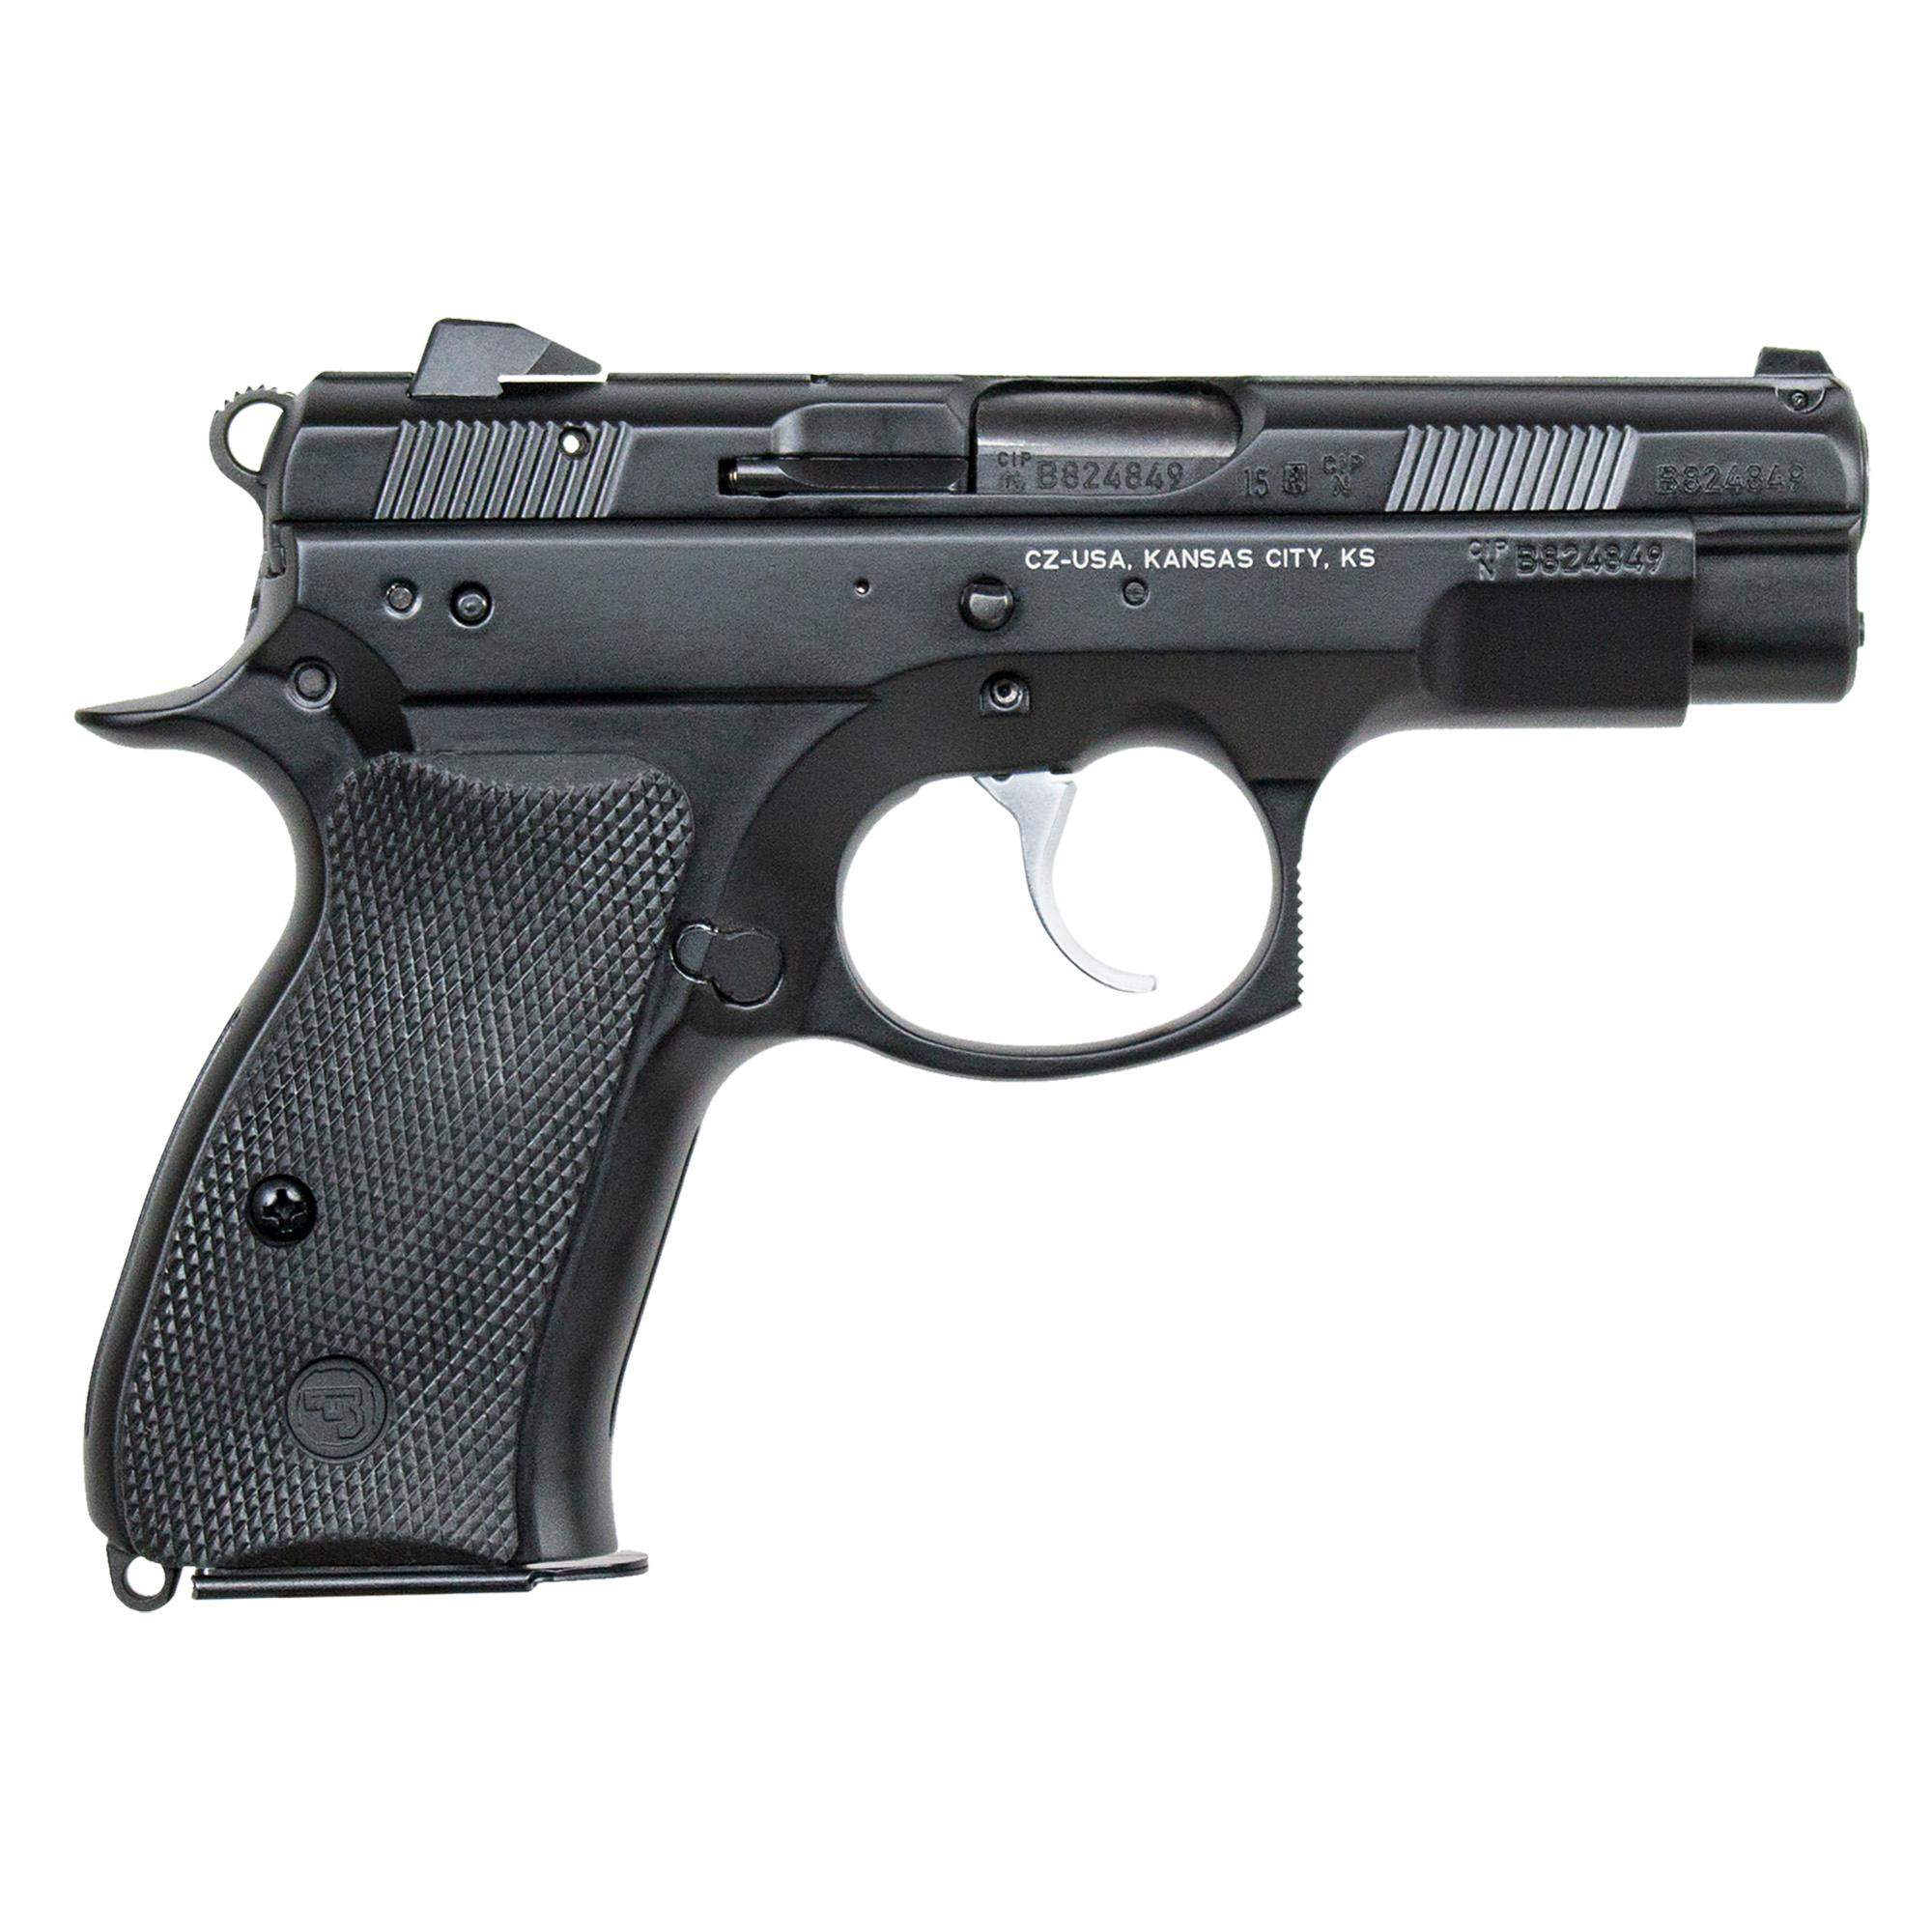  Cz 75 D Compact Pcr 3.75in 10rd